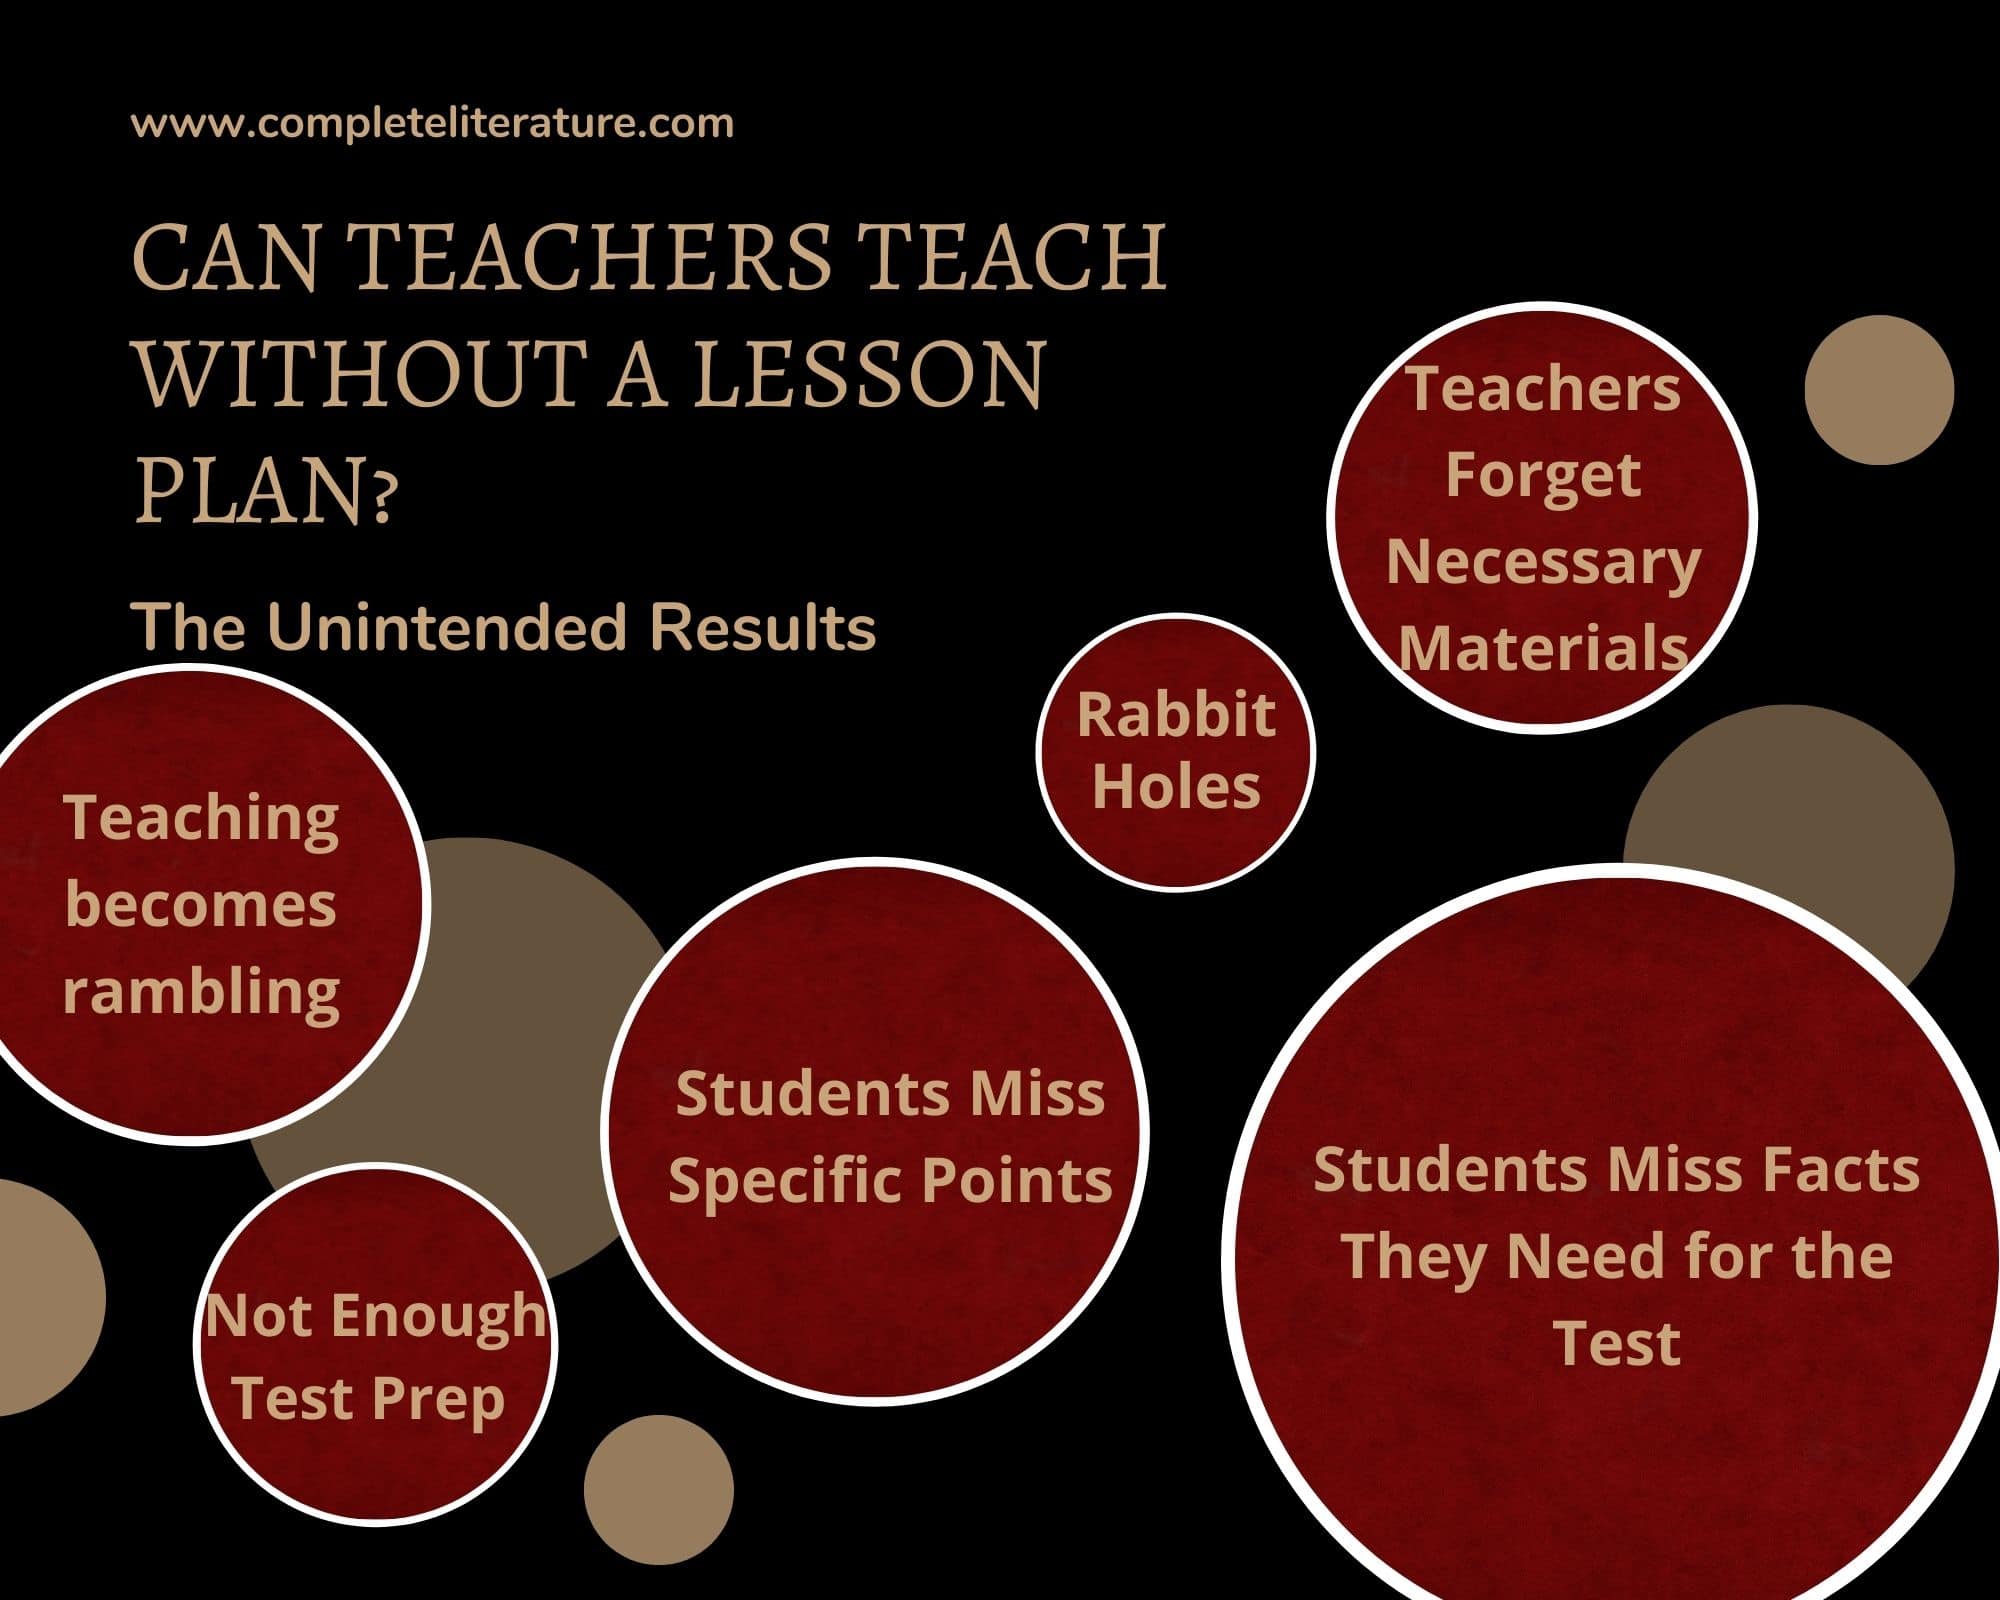 Can Teachers Teach Without a Lesson Plan?